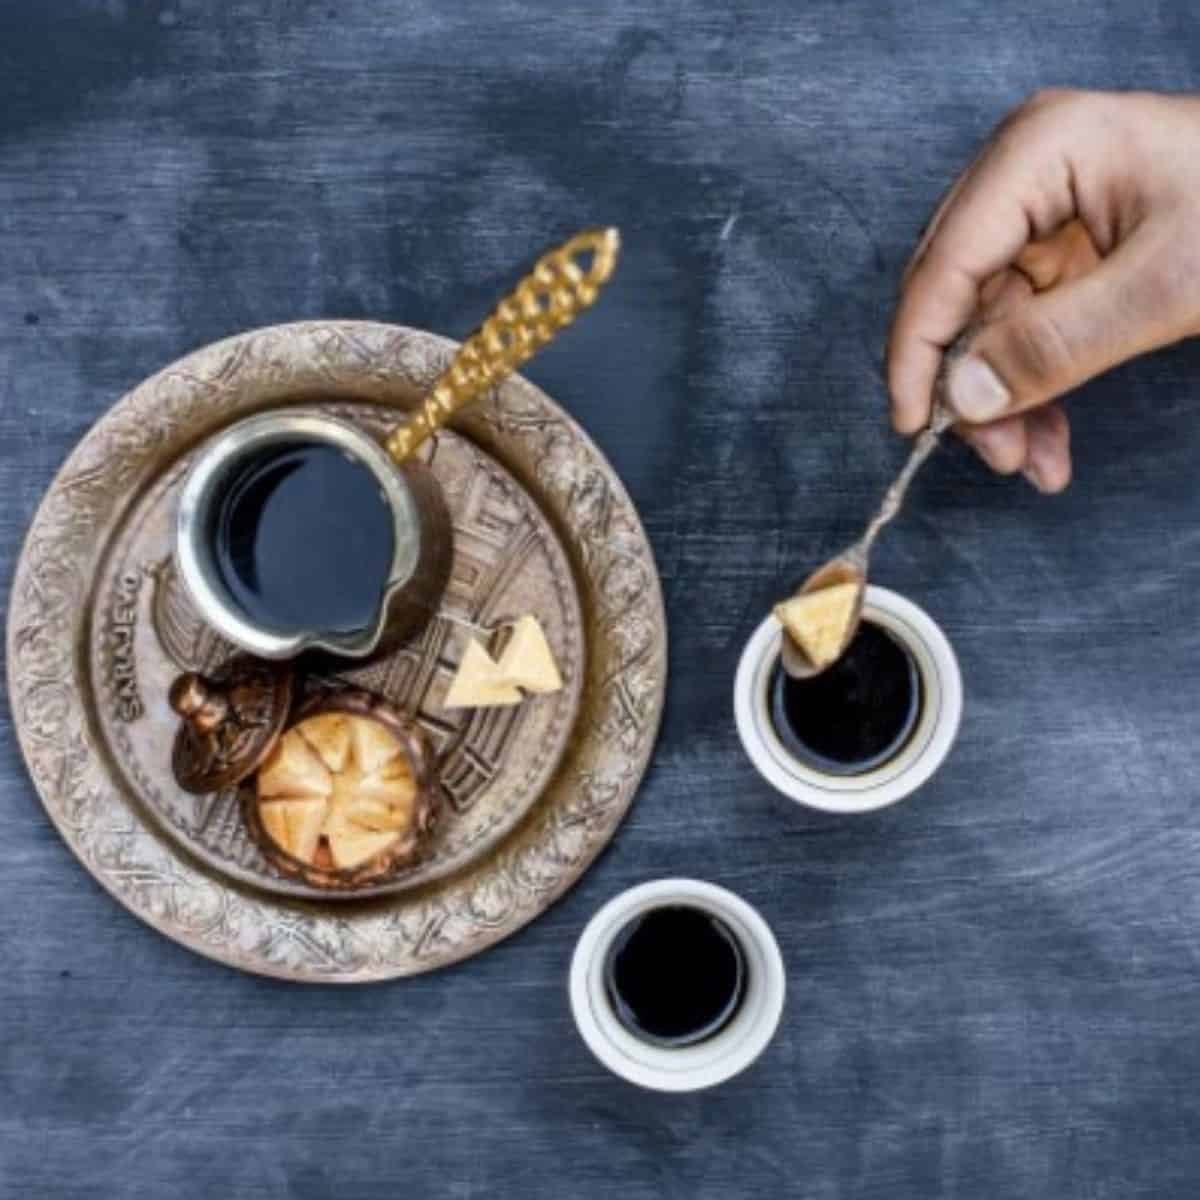 All More How To Make Turkish Coffee Youtube Quick Guide